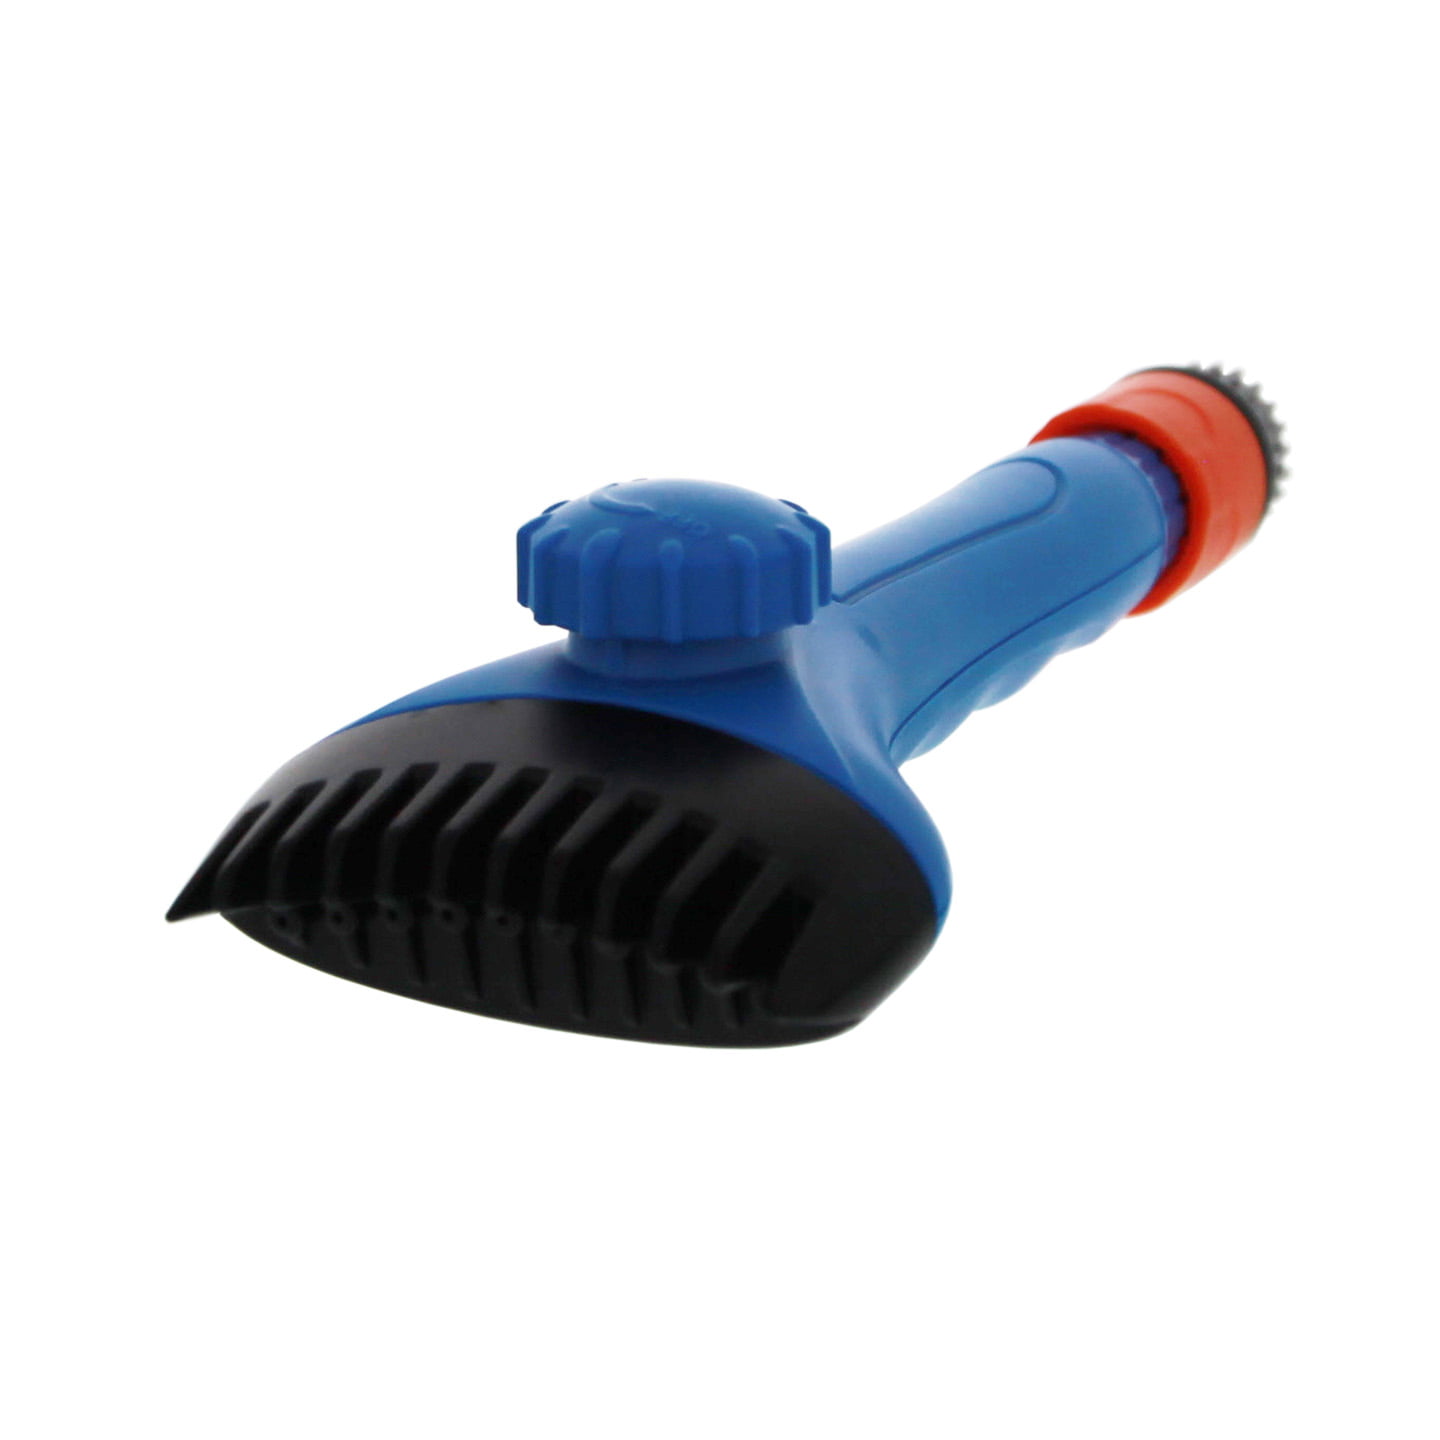 Makes light work of dirty filters For Pool & Spa Filters Filter Cleaner Wand 